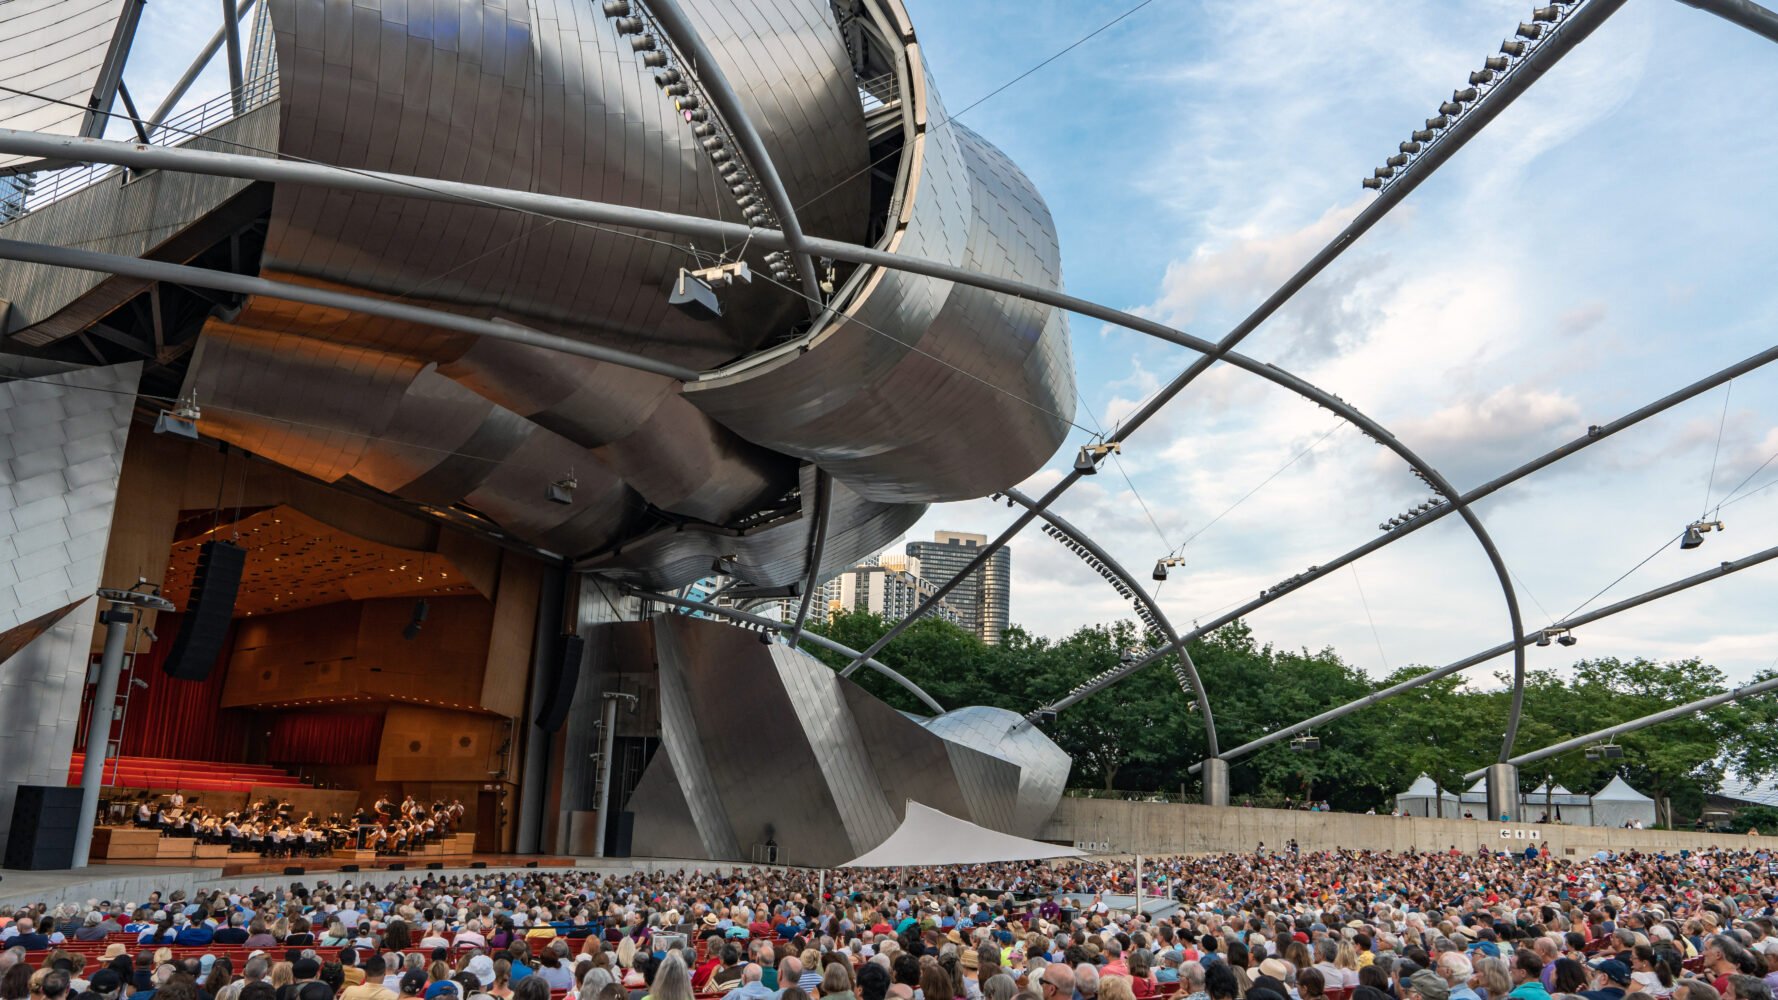 the GRant Park Orchestra performs on the striking Pritzker Pavilion stage to a full audience